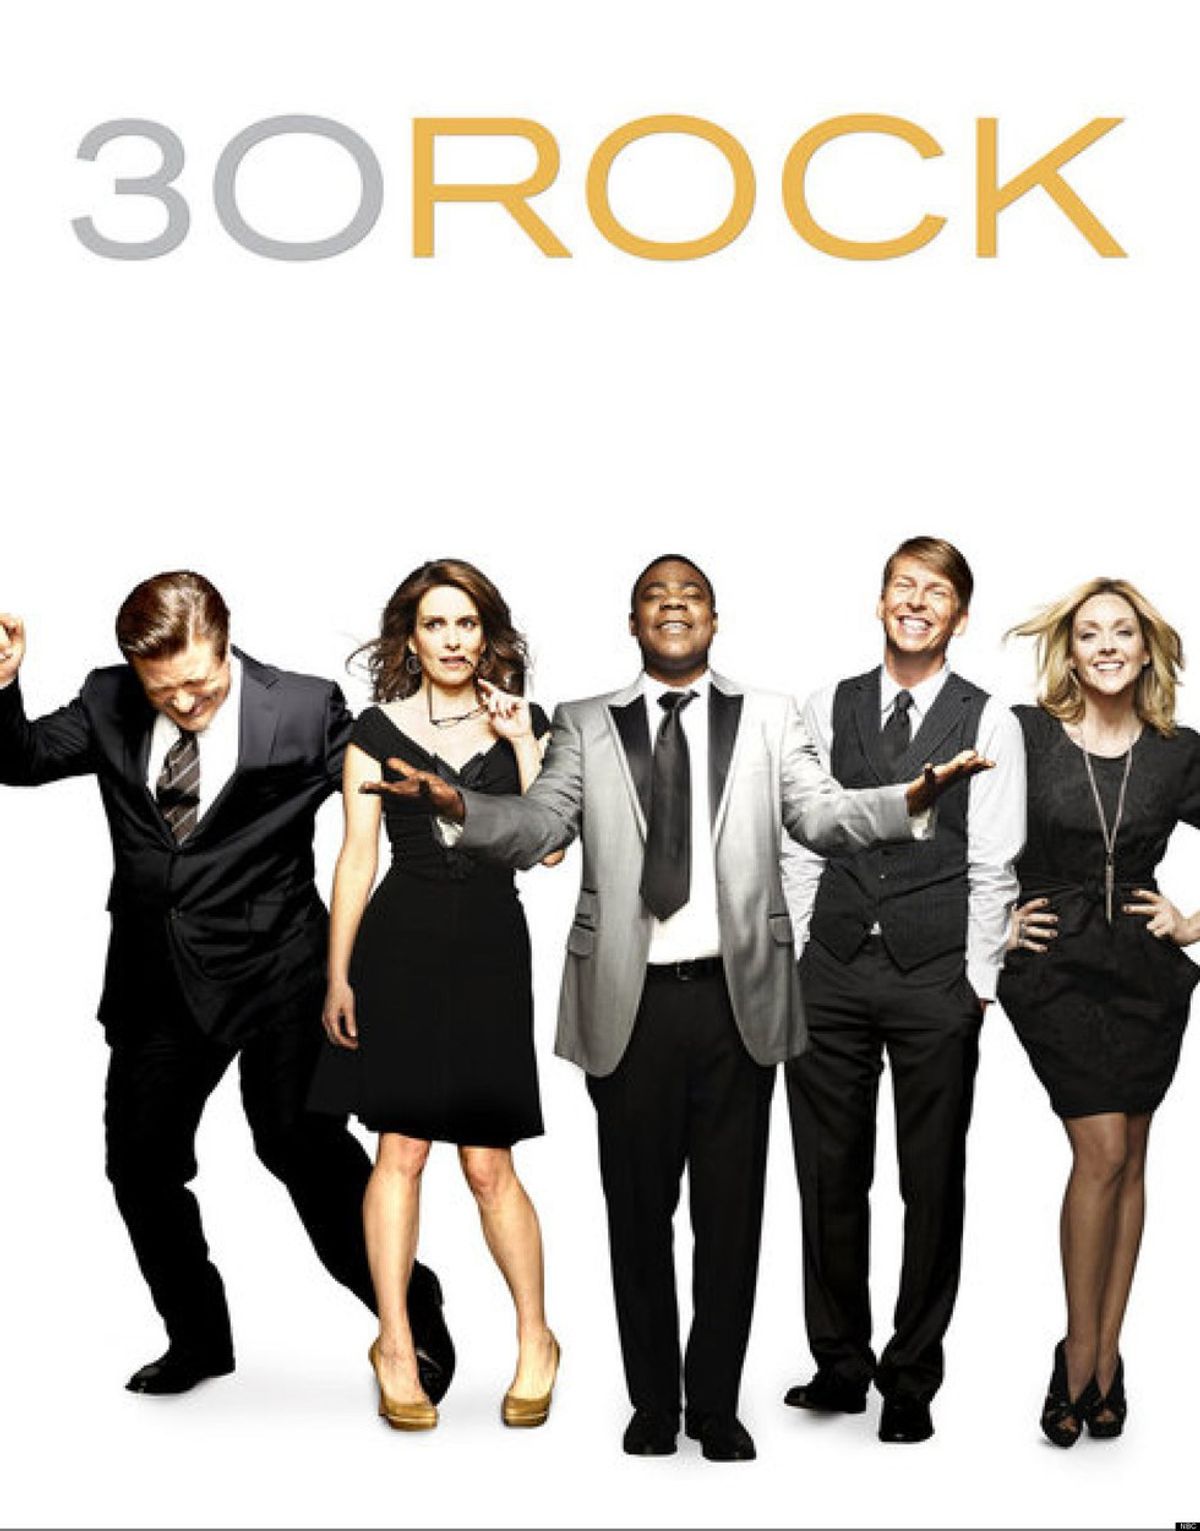 Fall Semester of College – As Told by the Cast of 30 Rock